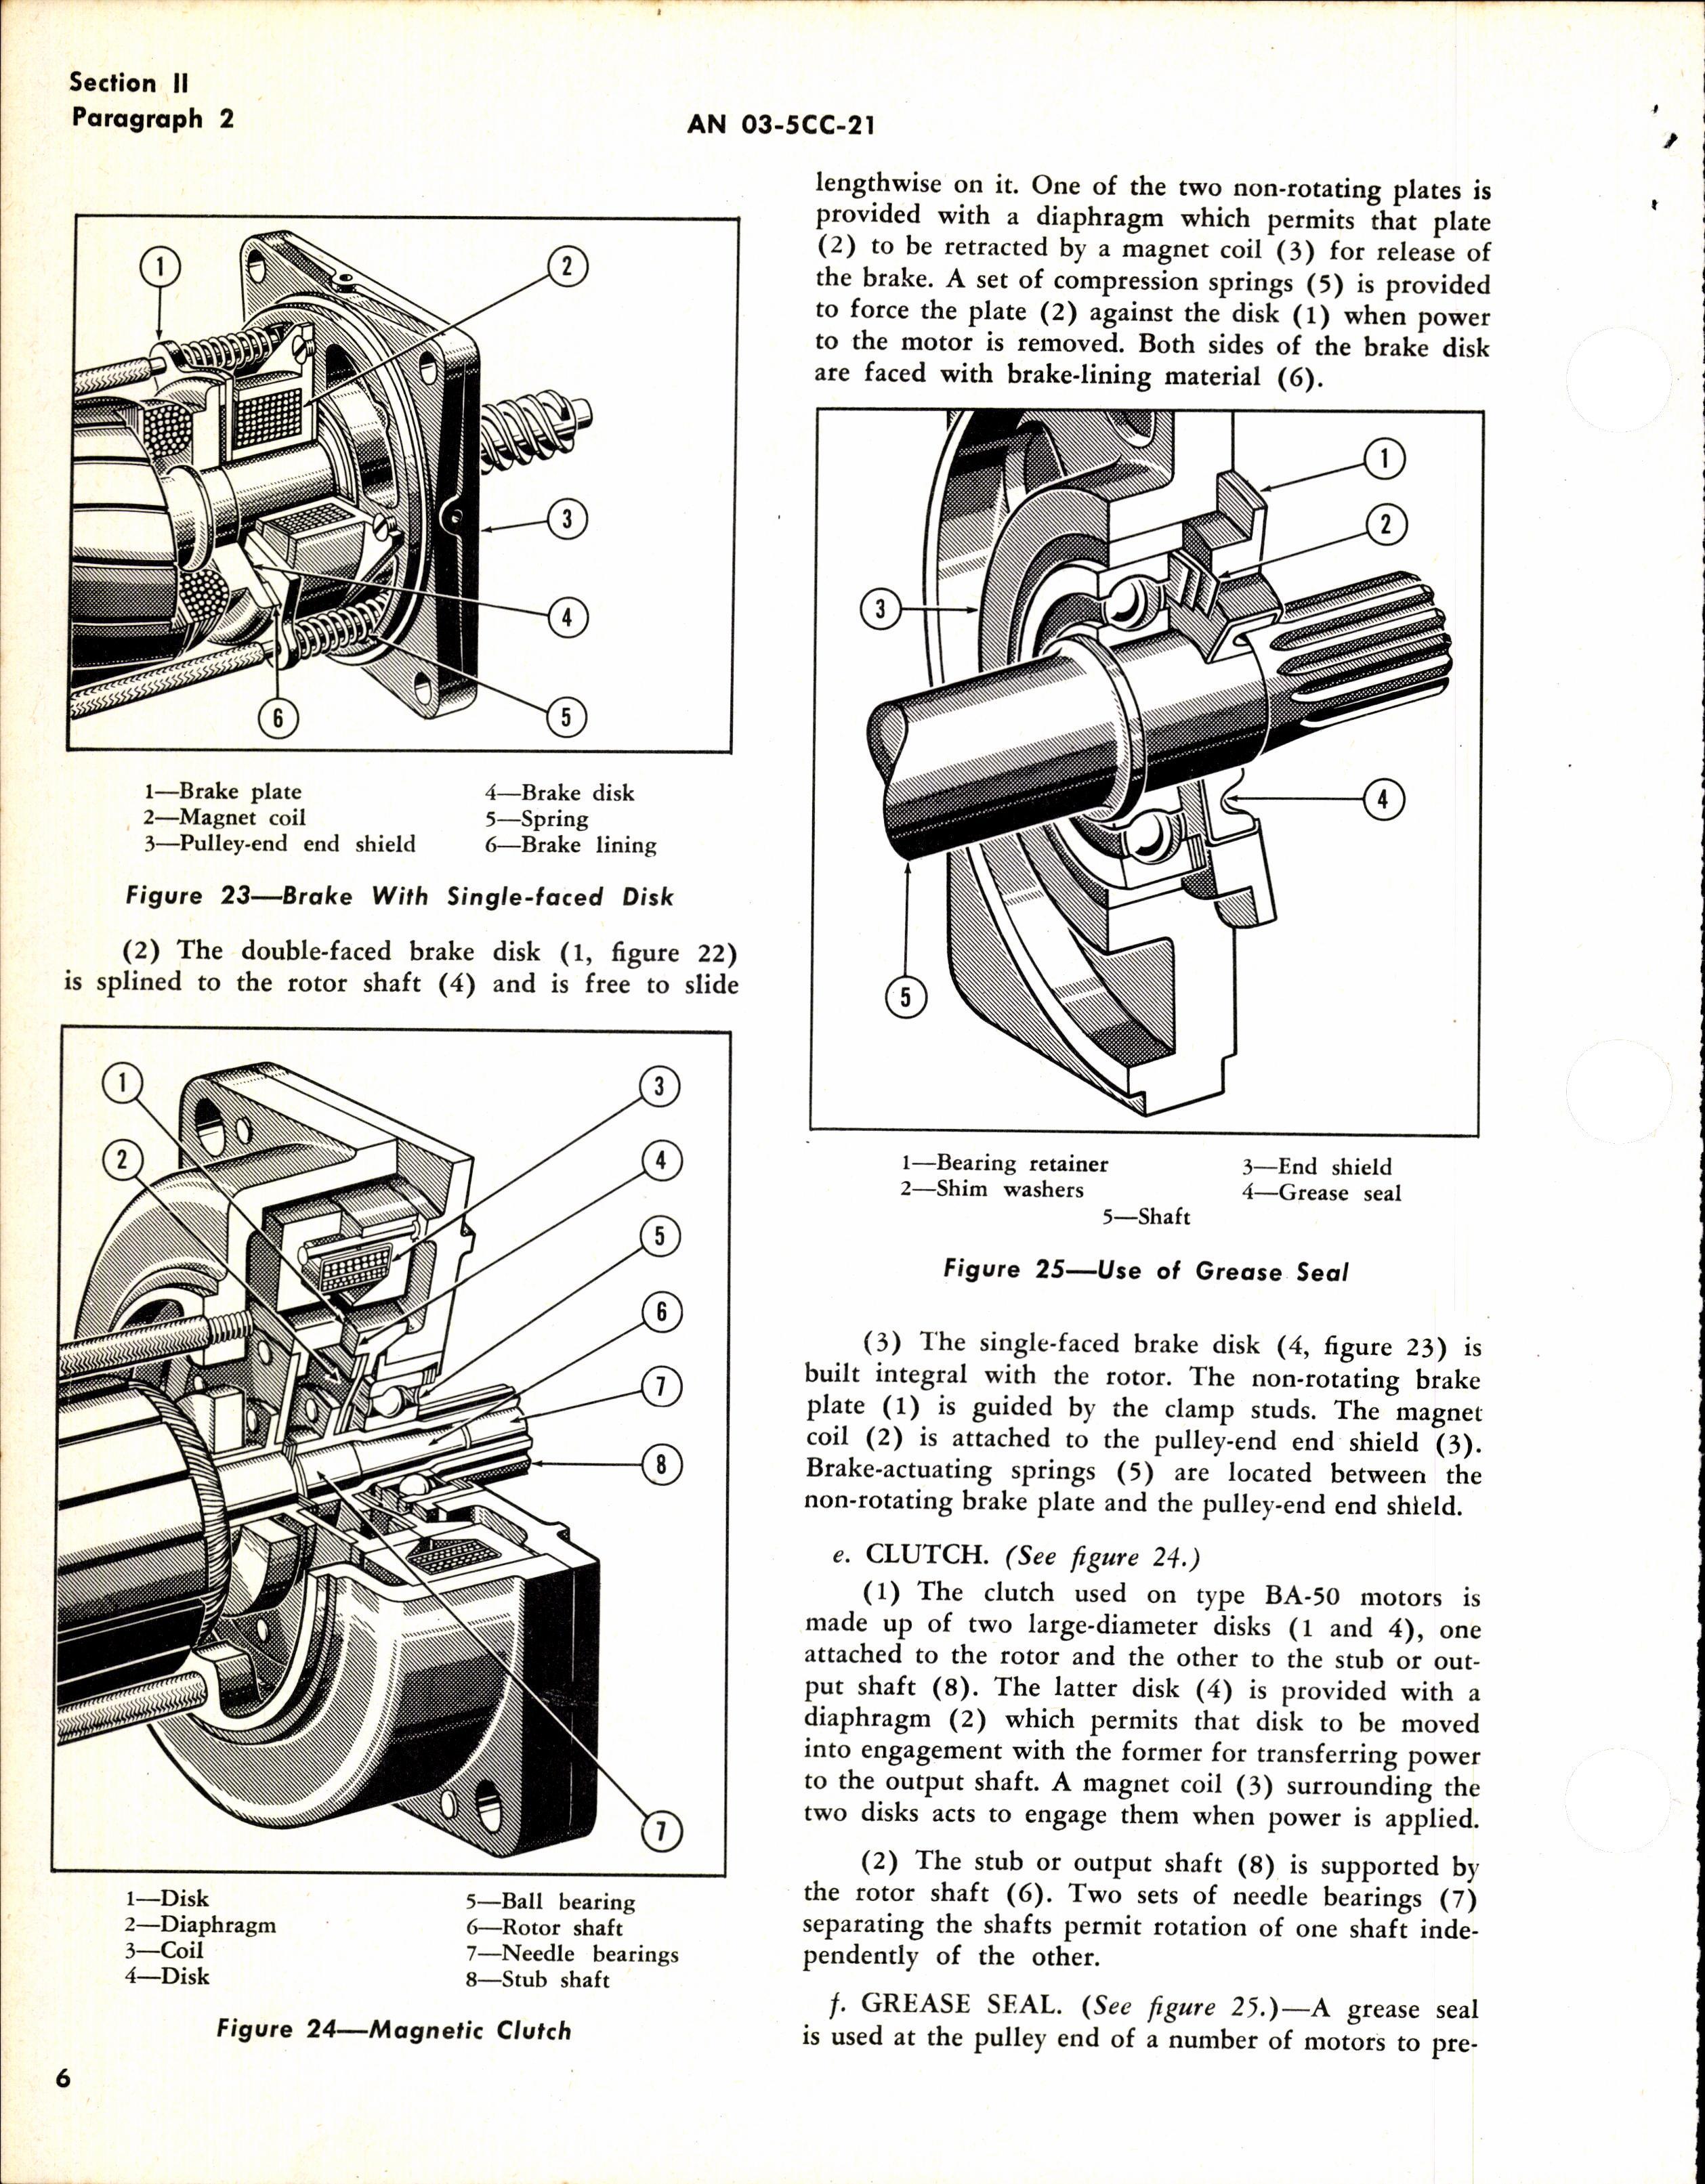 Sample page 8 from AirCorps Library document: Handbook of Instructions with Parts Catalog for Model 5BA50 Series Electric Motors